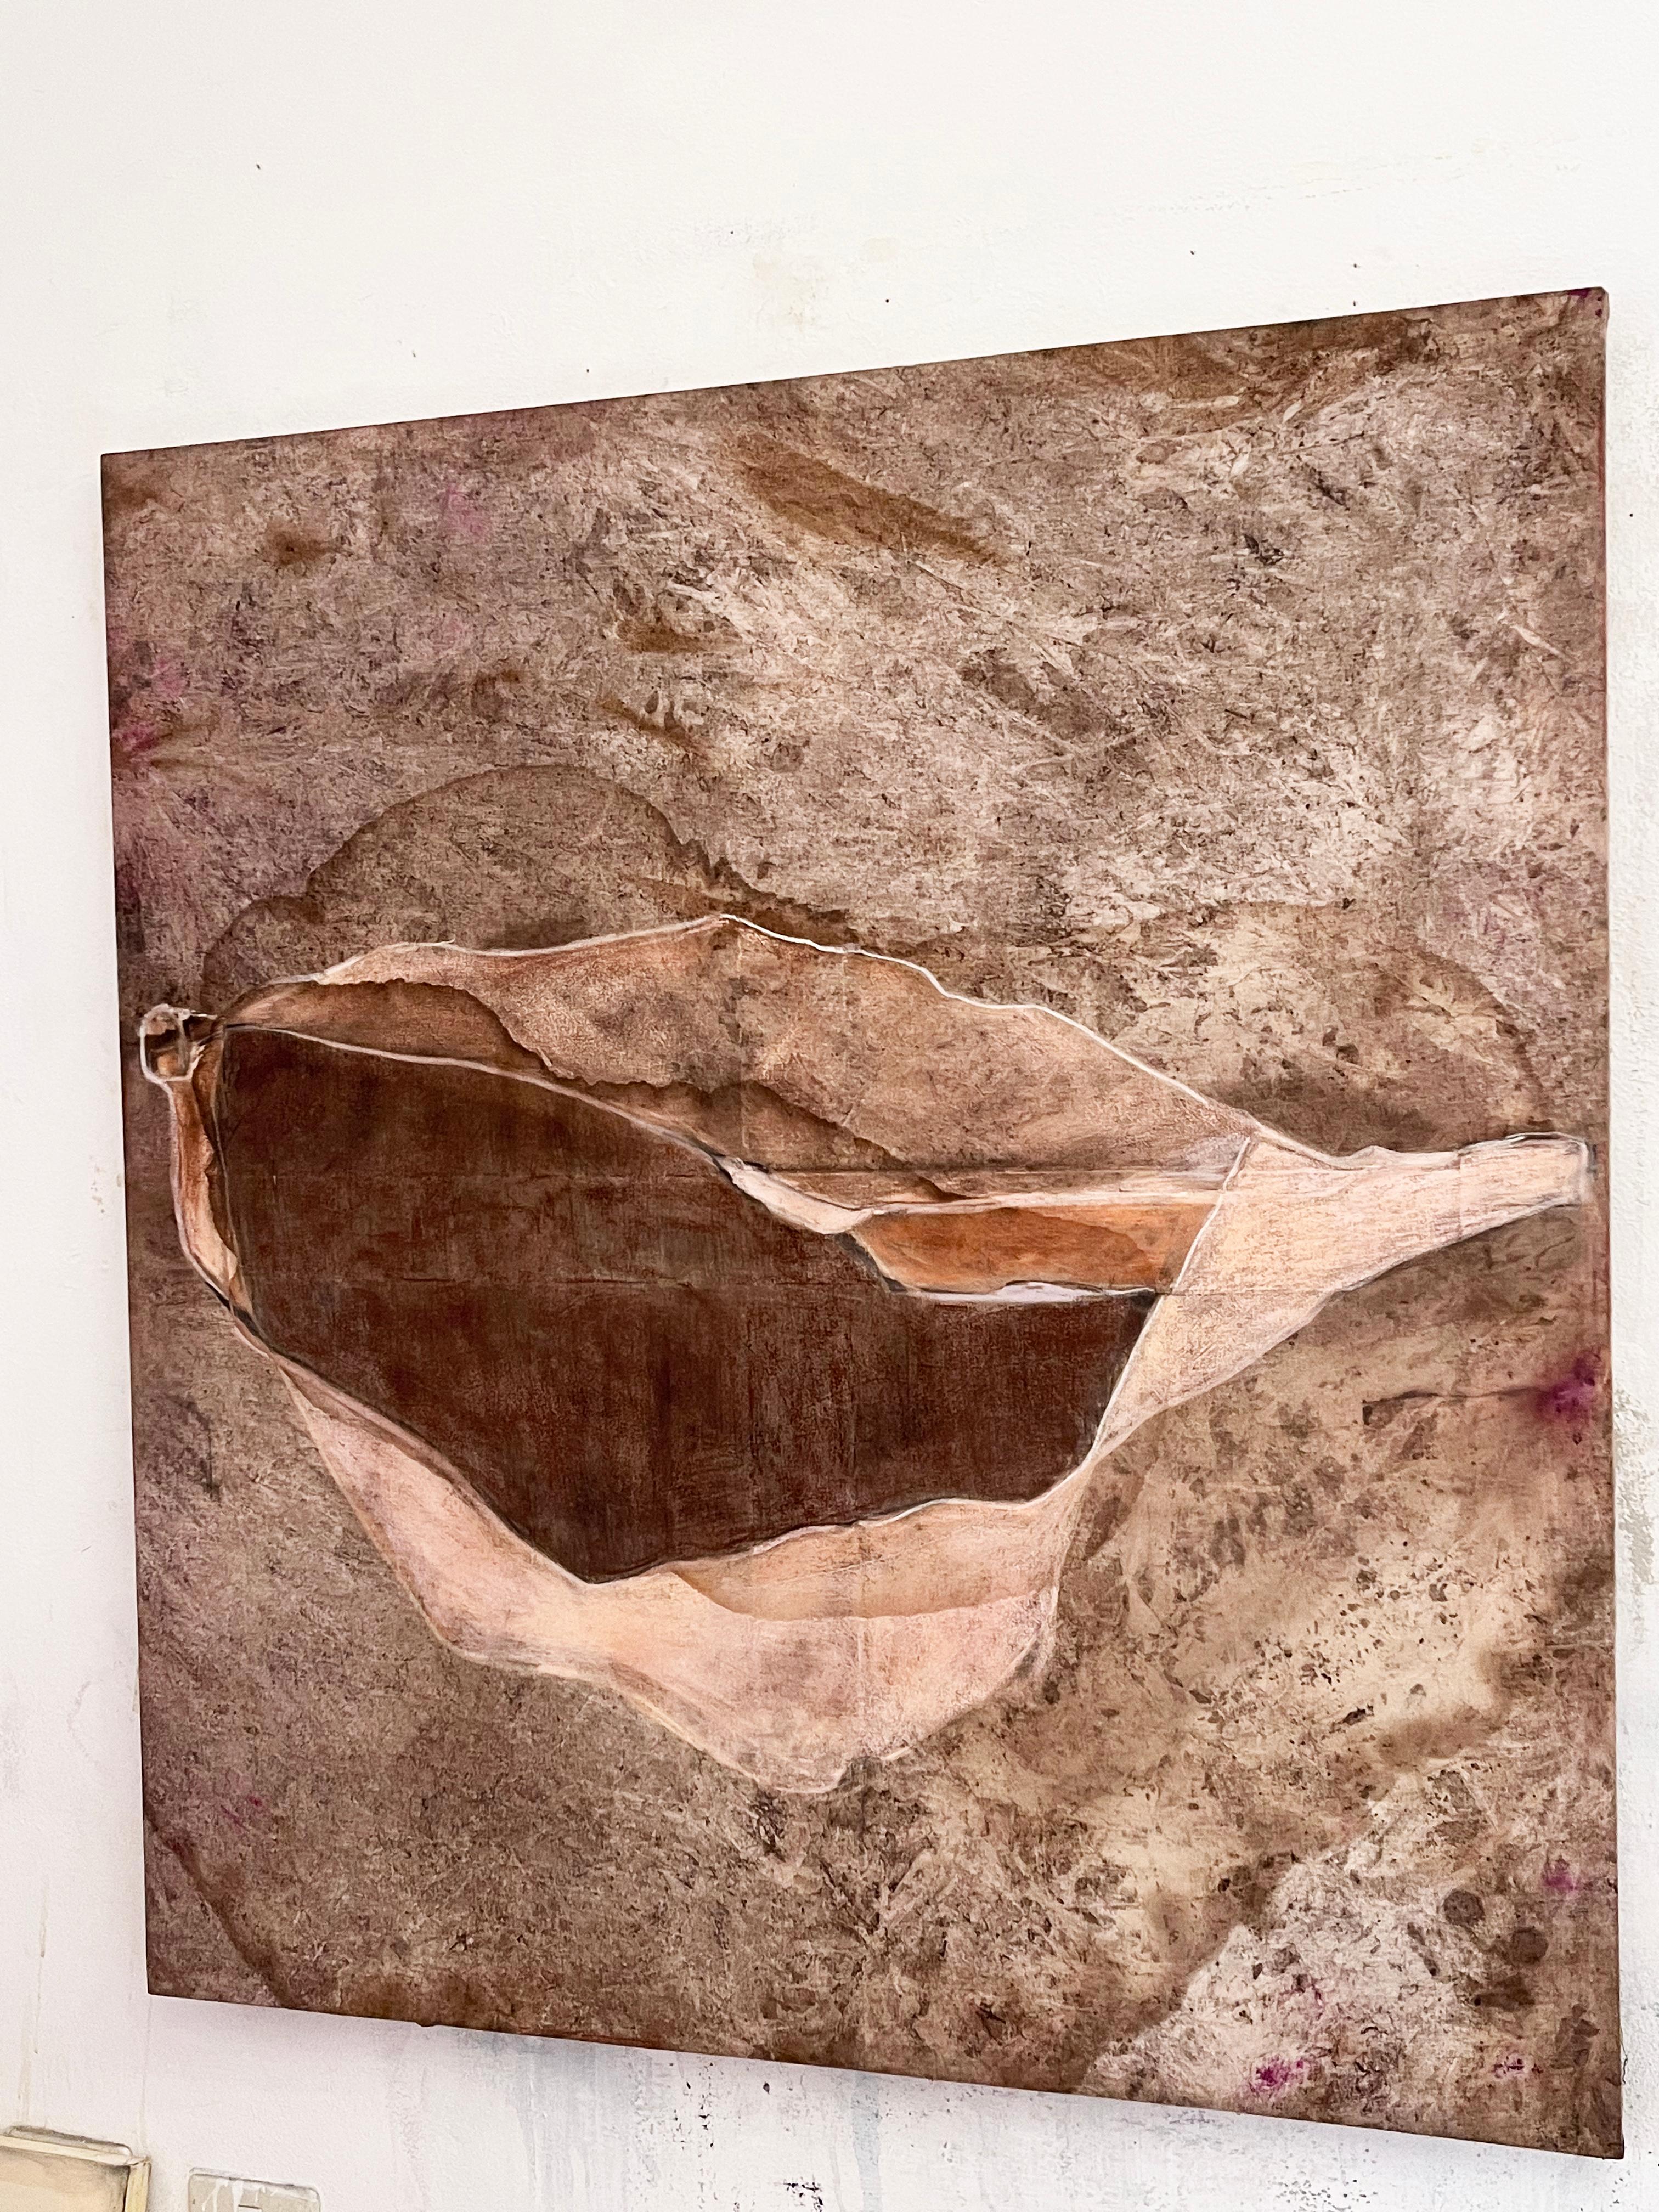 
Ground 
oil paint and pastels on cotton canvas
120x110 cm 
ready to hang


her painting tells of the relationship between man, nature and time, the landscape, the sign and the trace,
through the stripping, reduction and subtraction of figurative